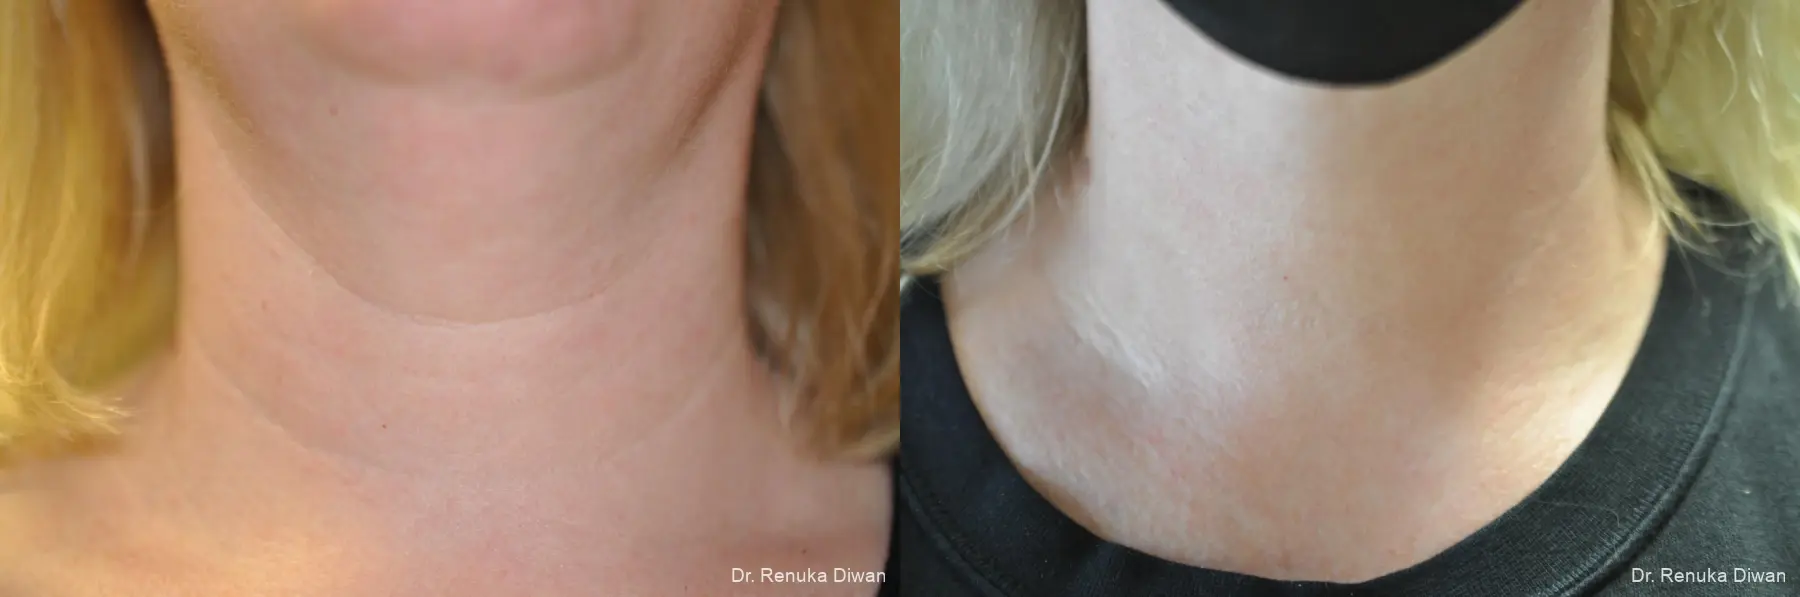 Neck Creases: Patient 5 - Before and After 1